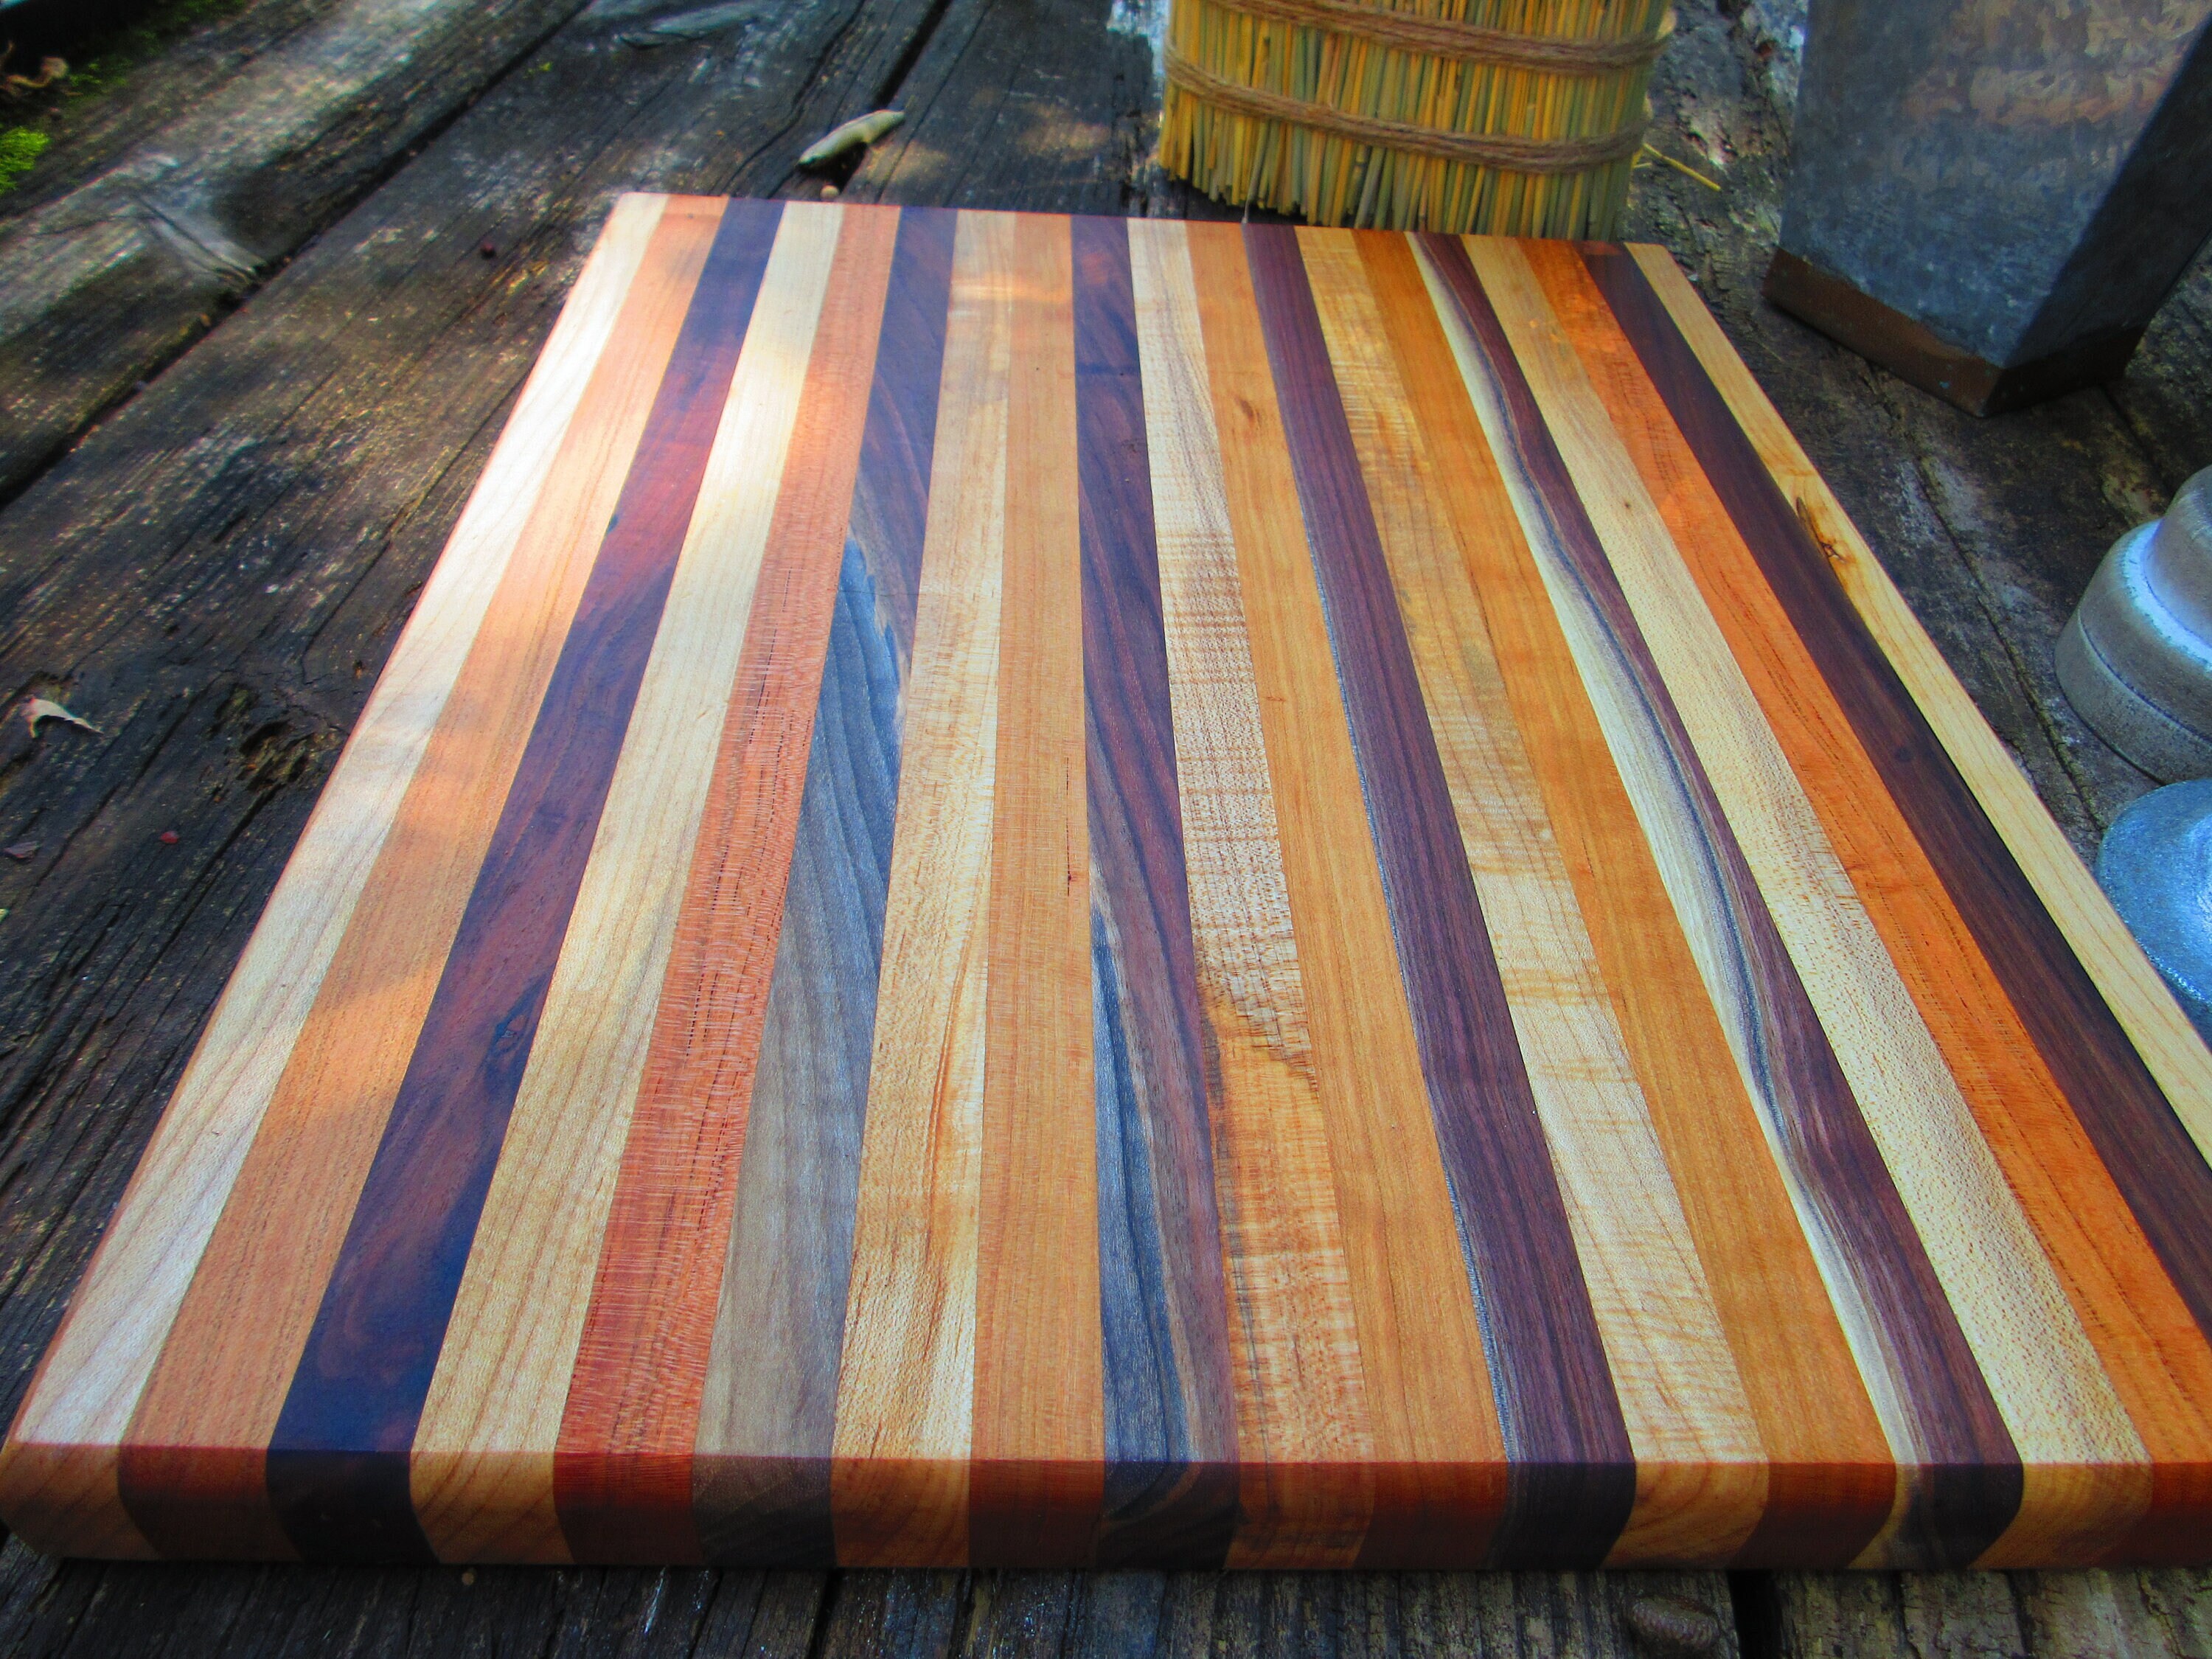 Amish Made 5 Piece Wood Cutting Board Set with Stand